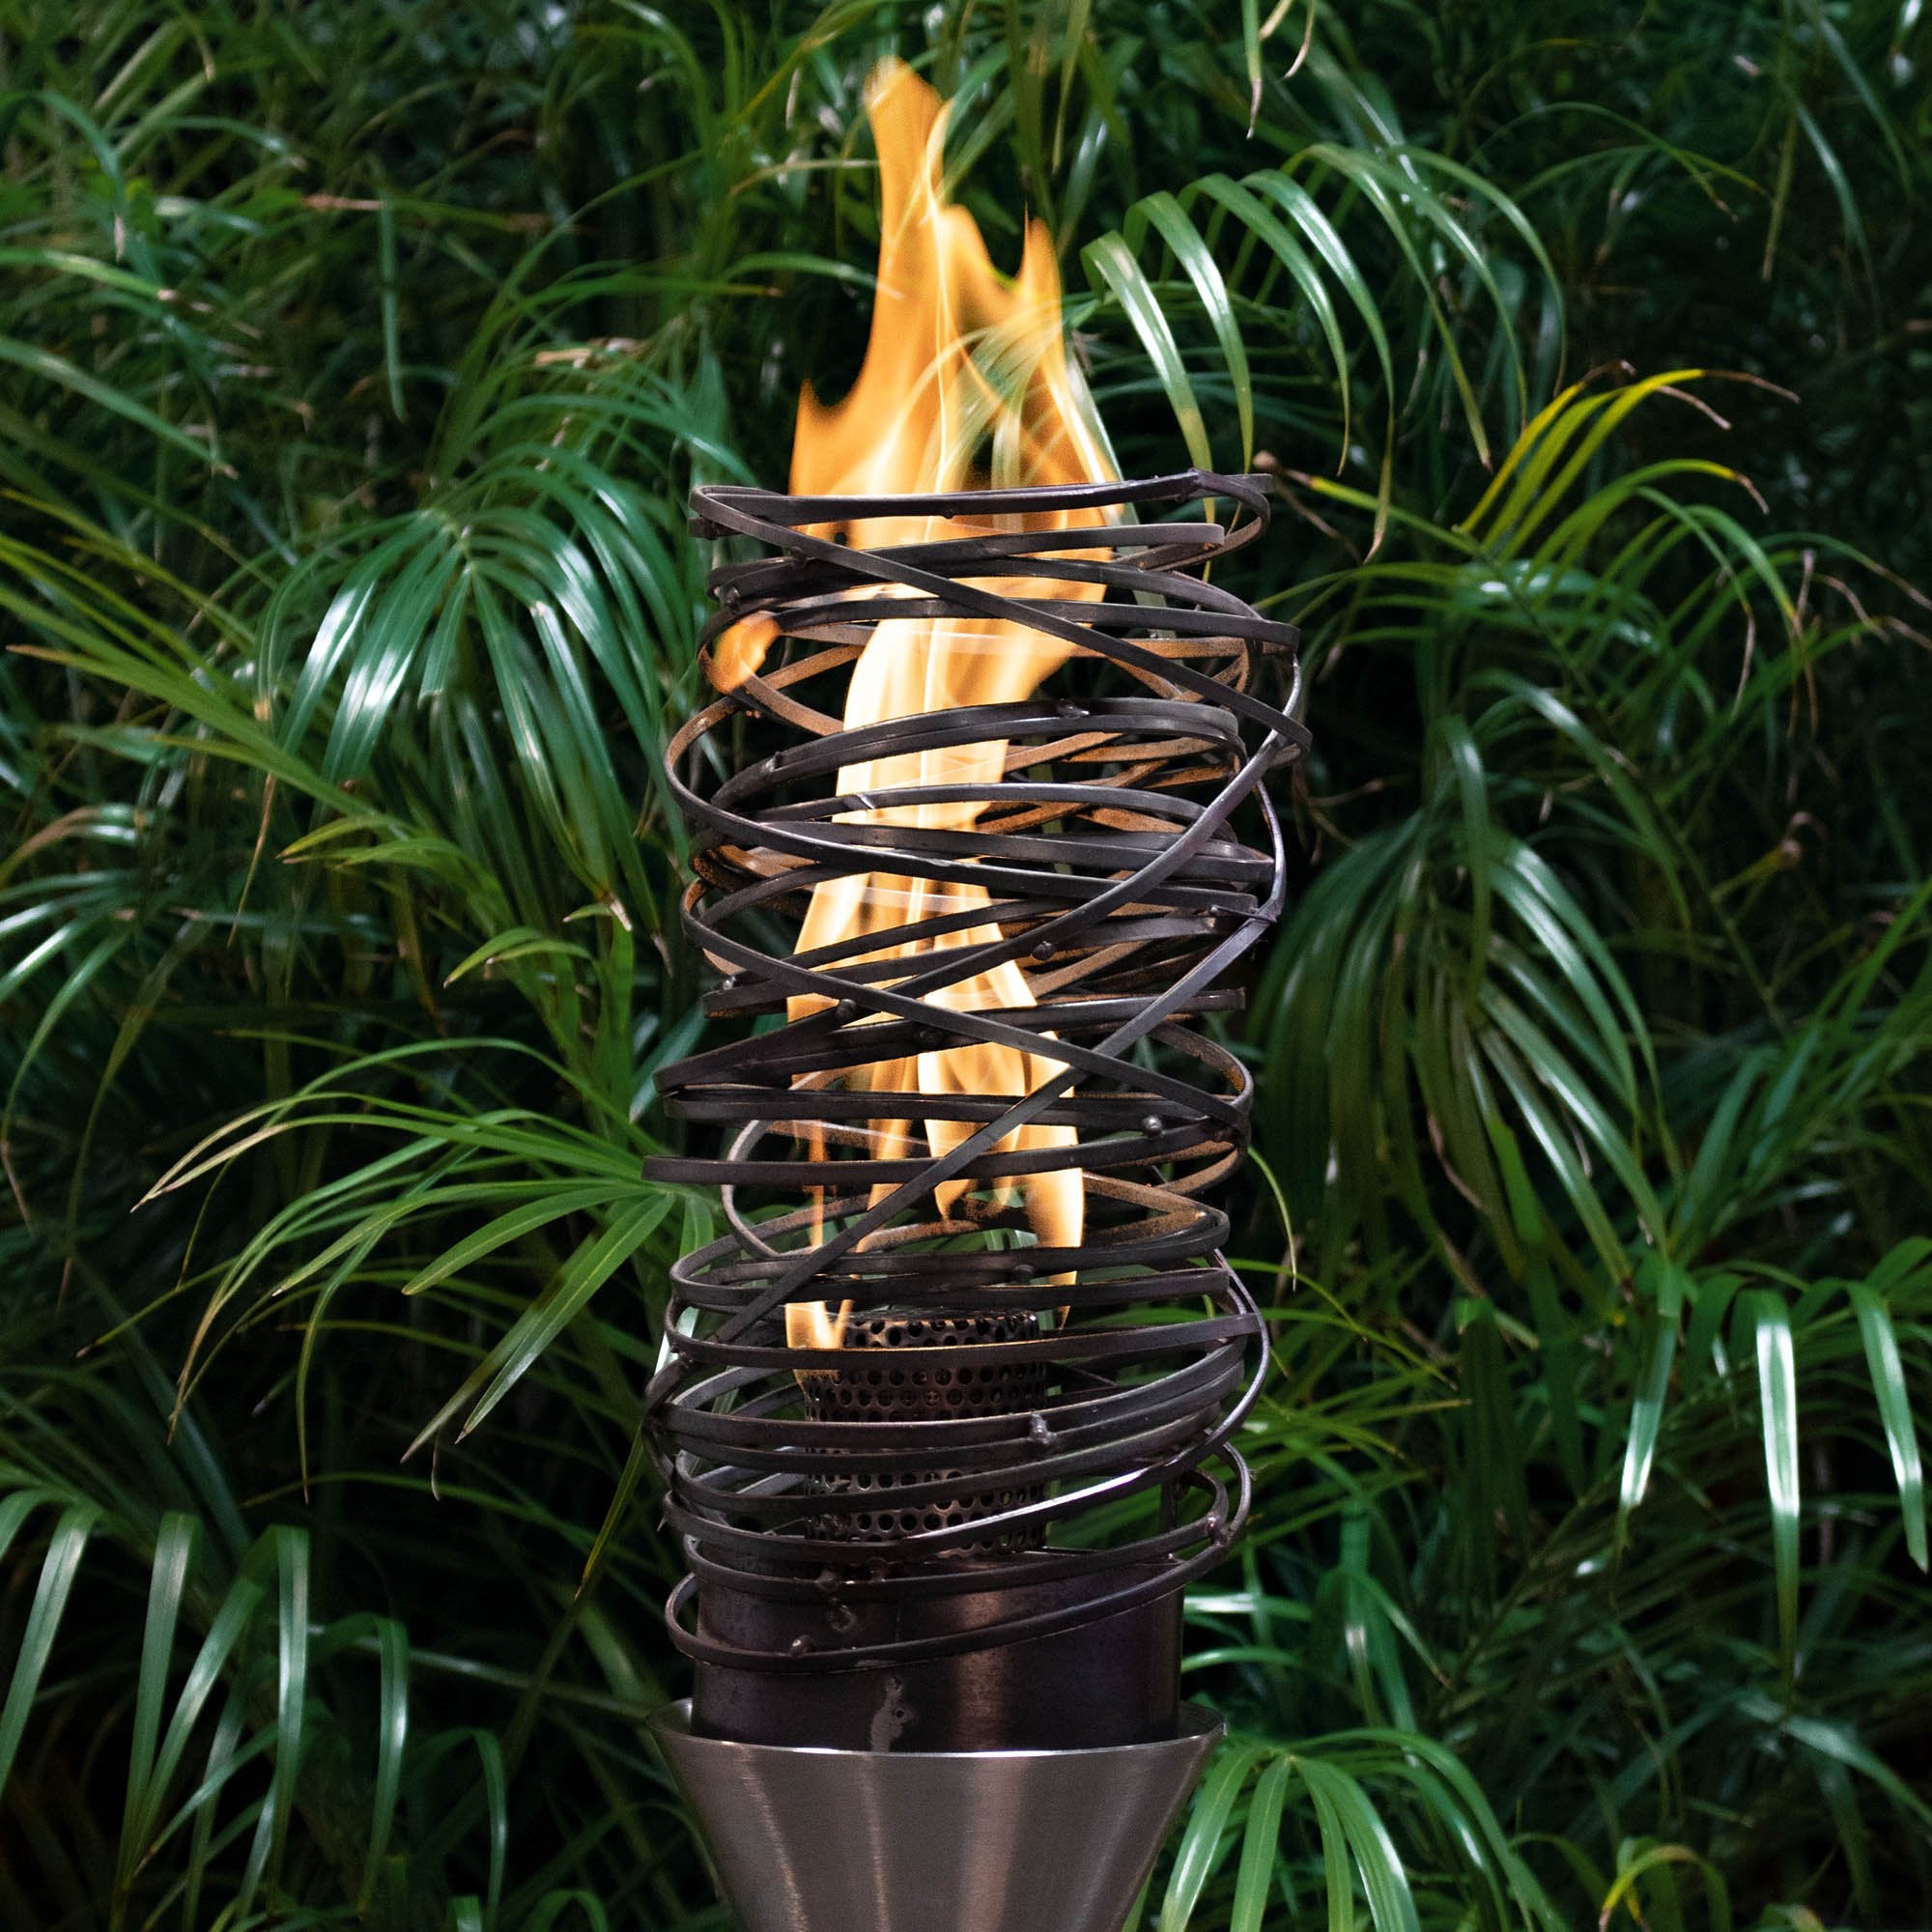 TOP FIRES TANGLED Fire Torch 14" in Stainless Steel - Majestic Fountains